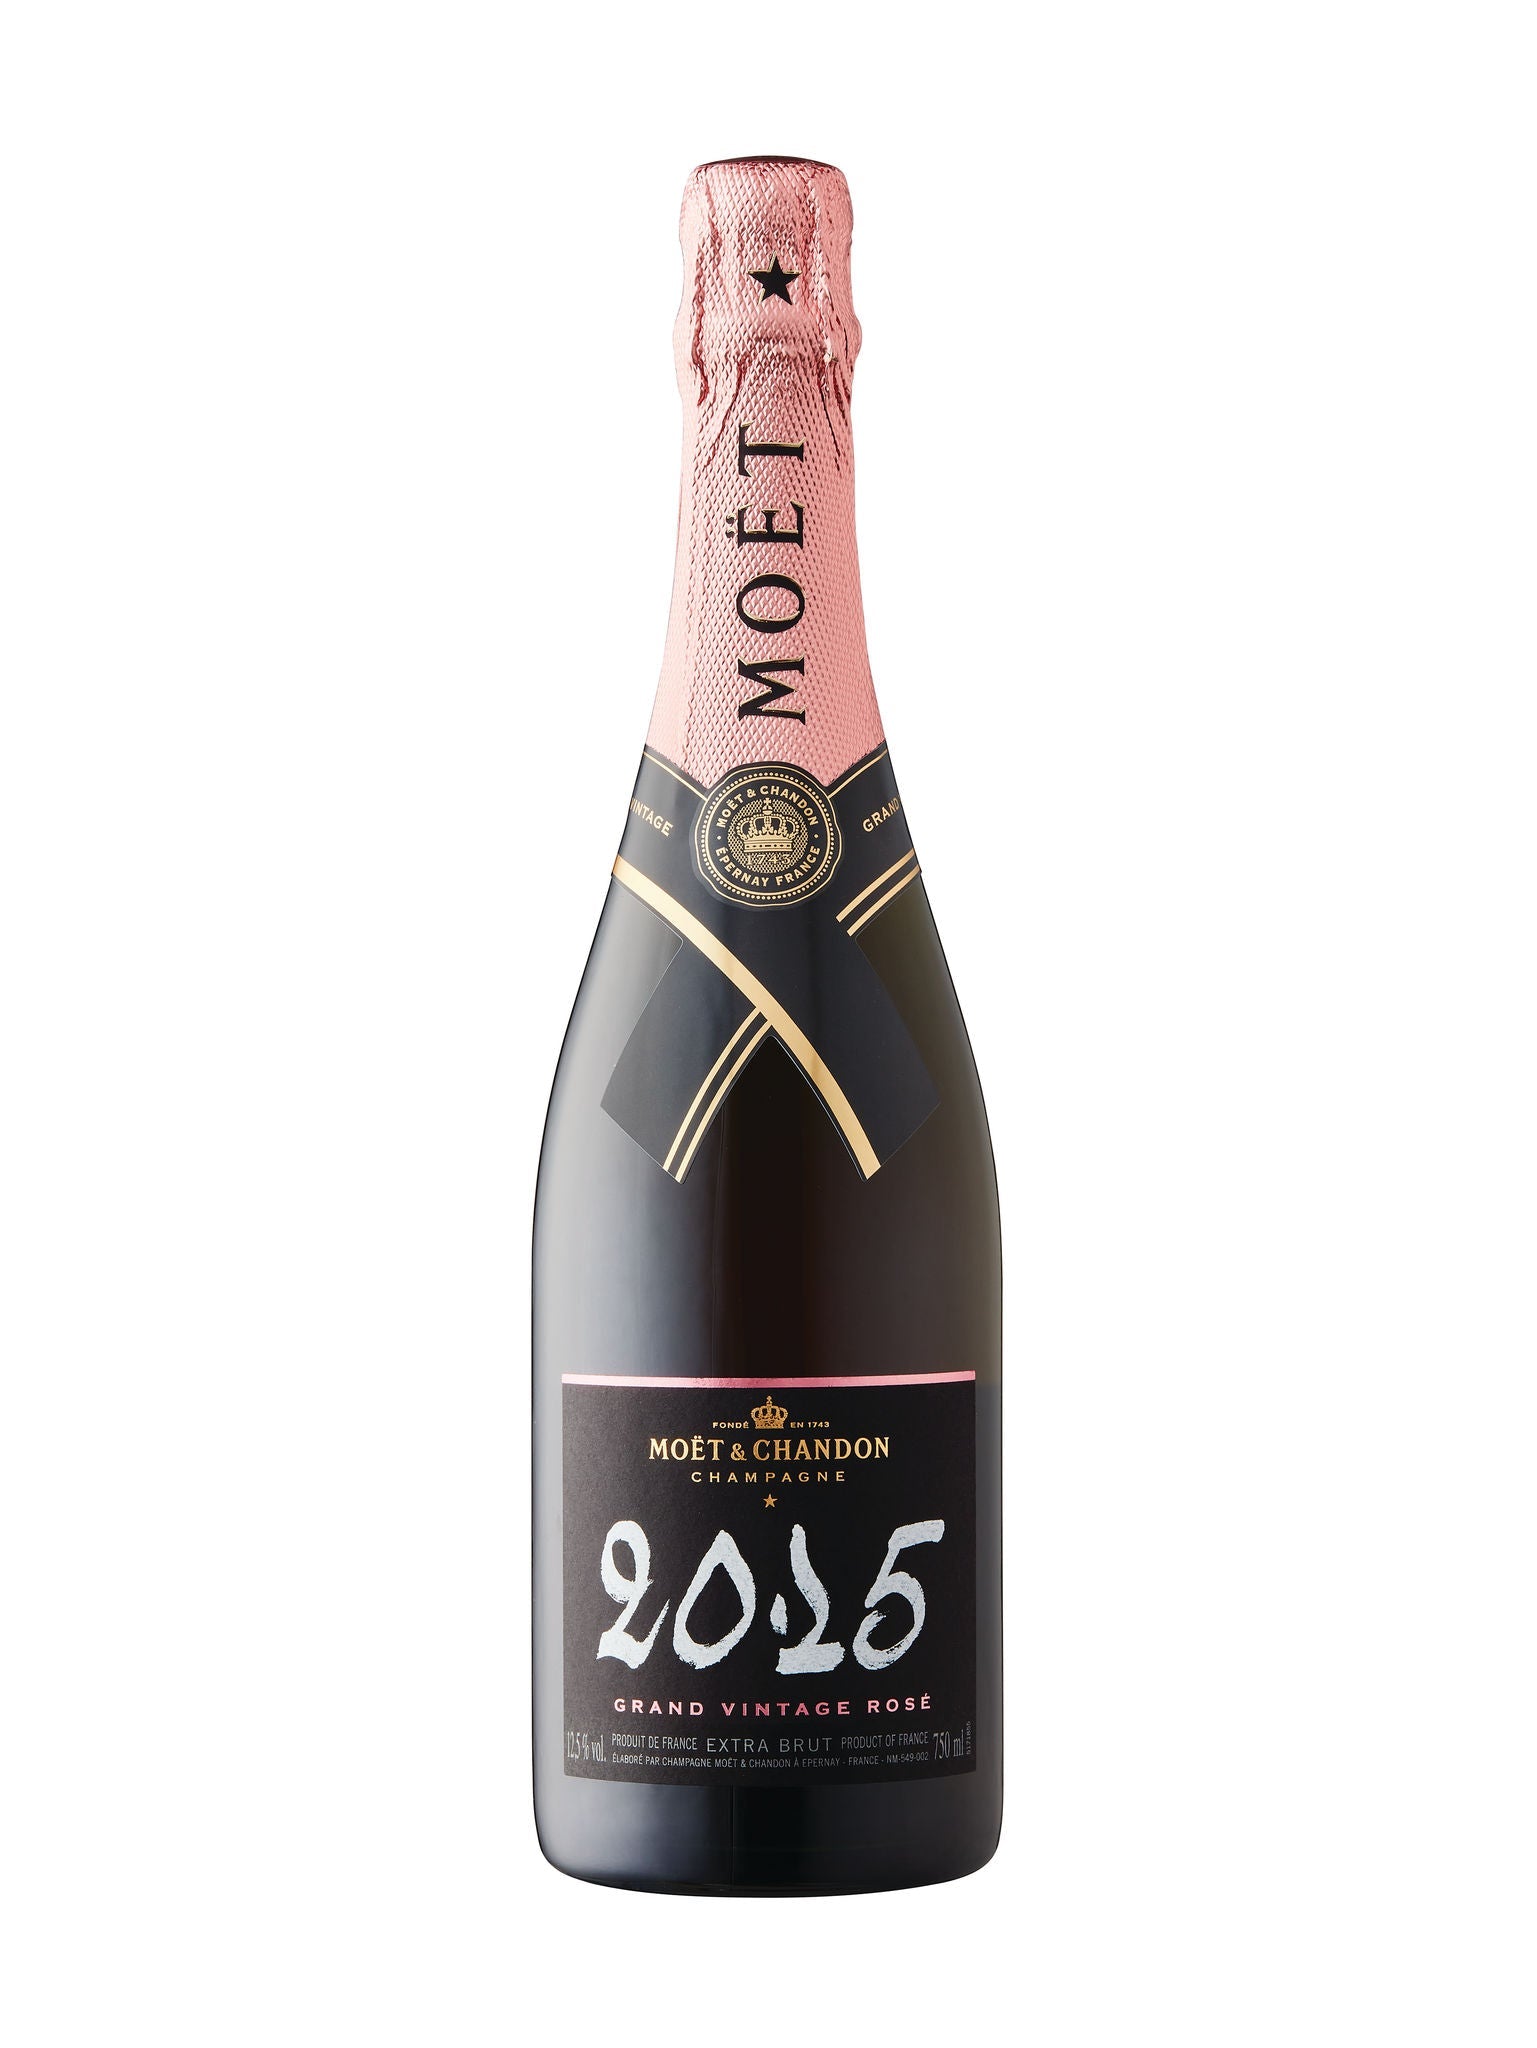 Moët & Chandon Grand Vintage Extra Brut Rosé Champagne 2015 | Exquisite Wine & Alcohol Gift Delivery Toronto Canada | Vyno